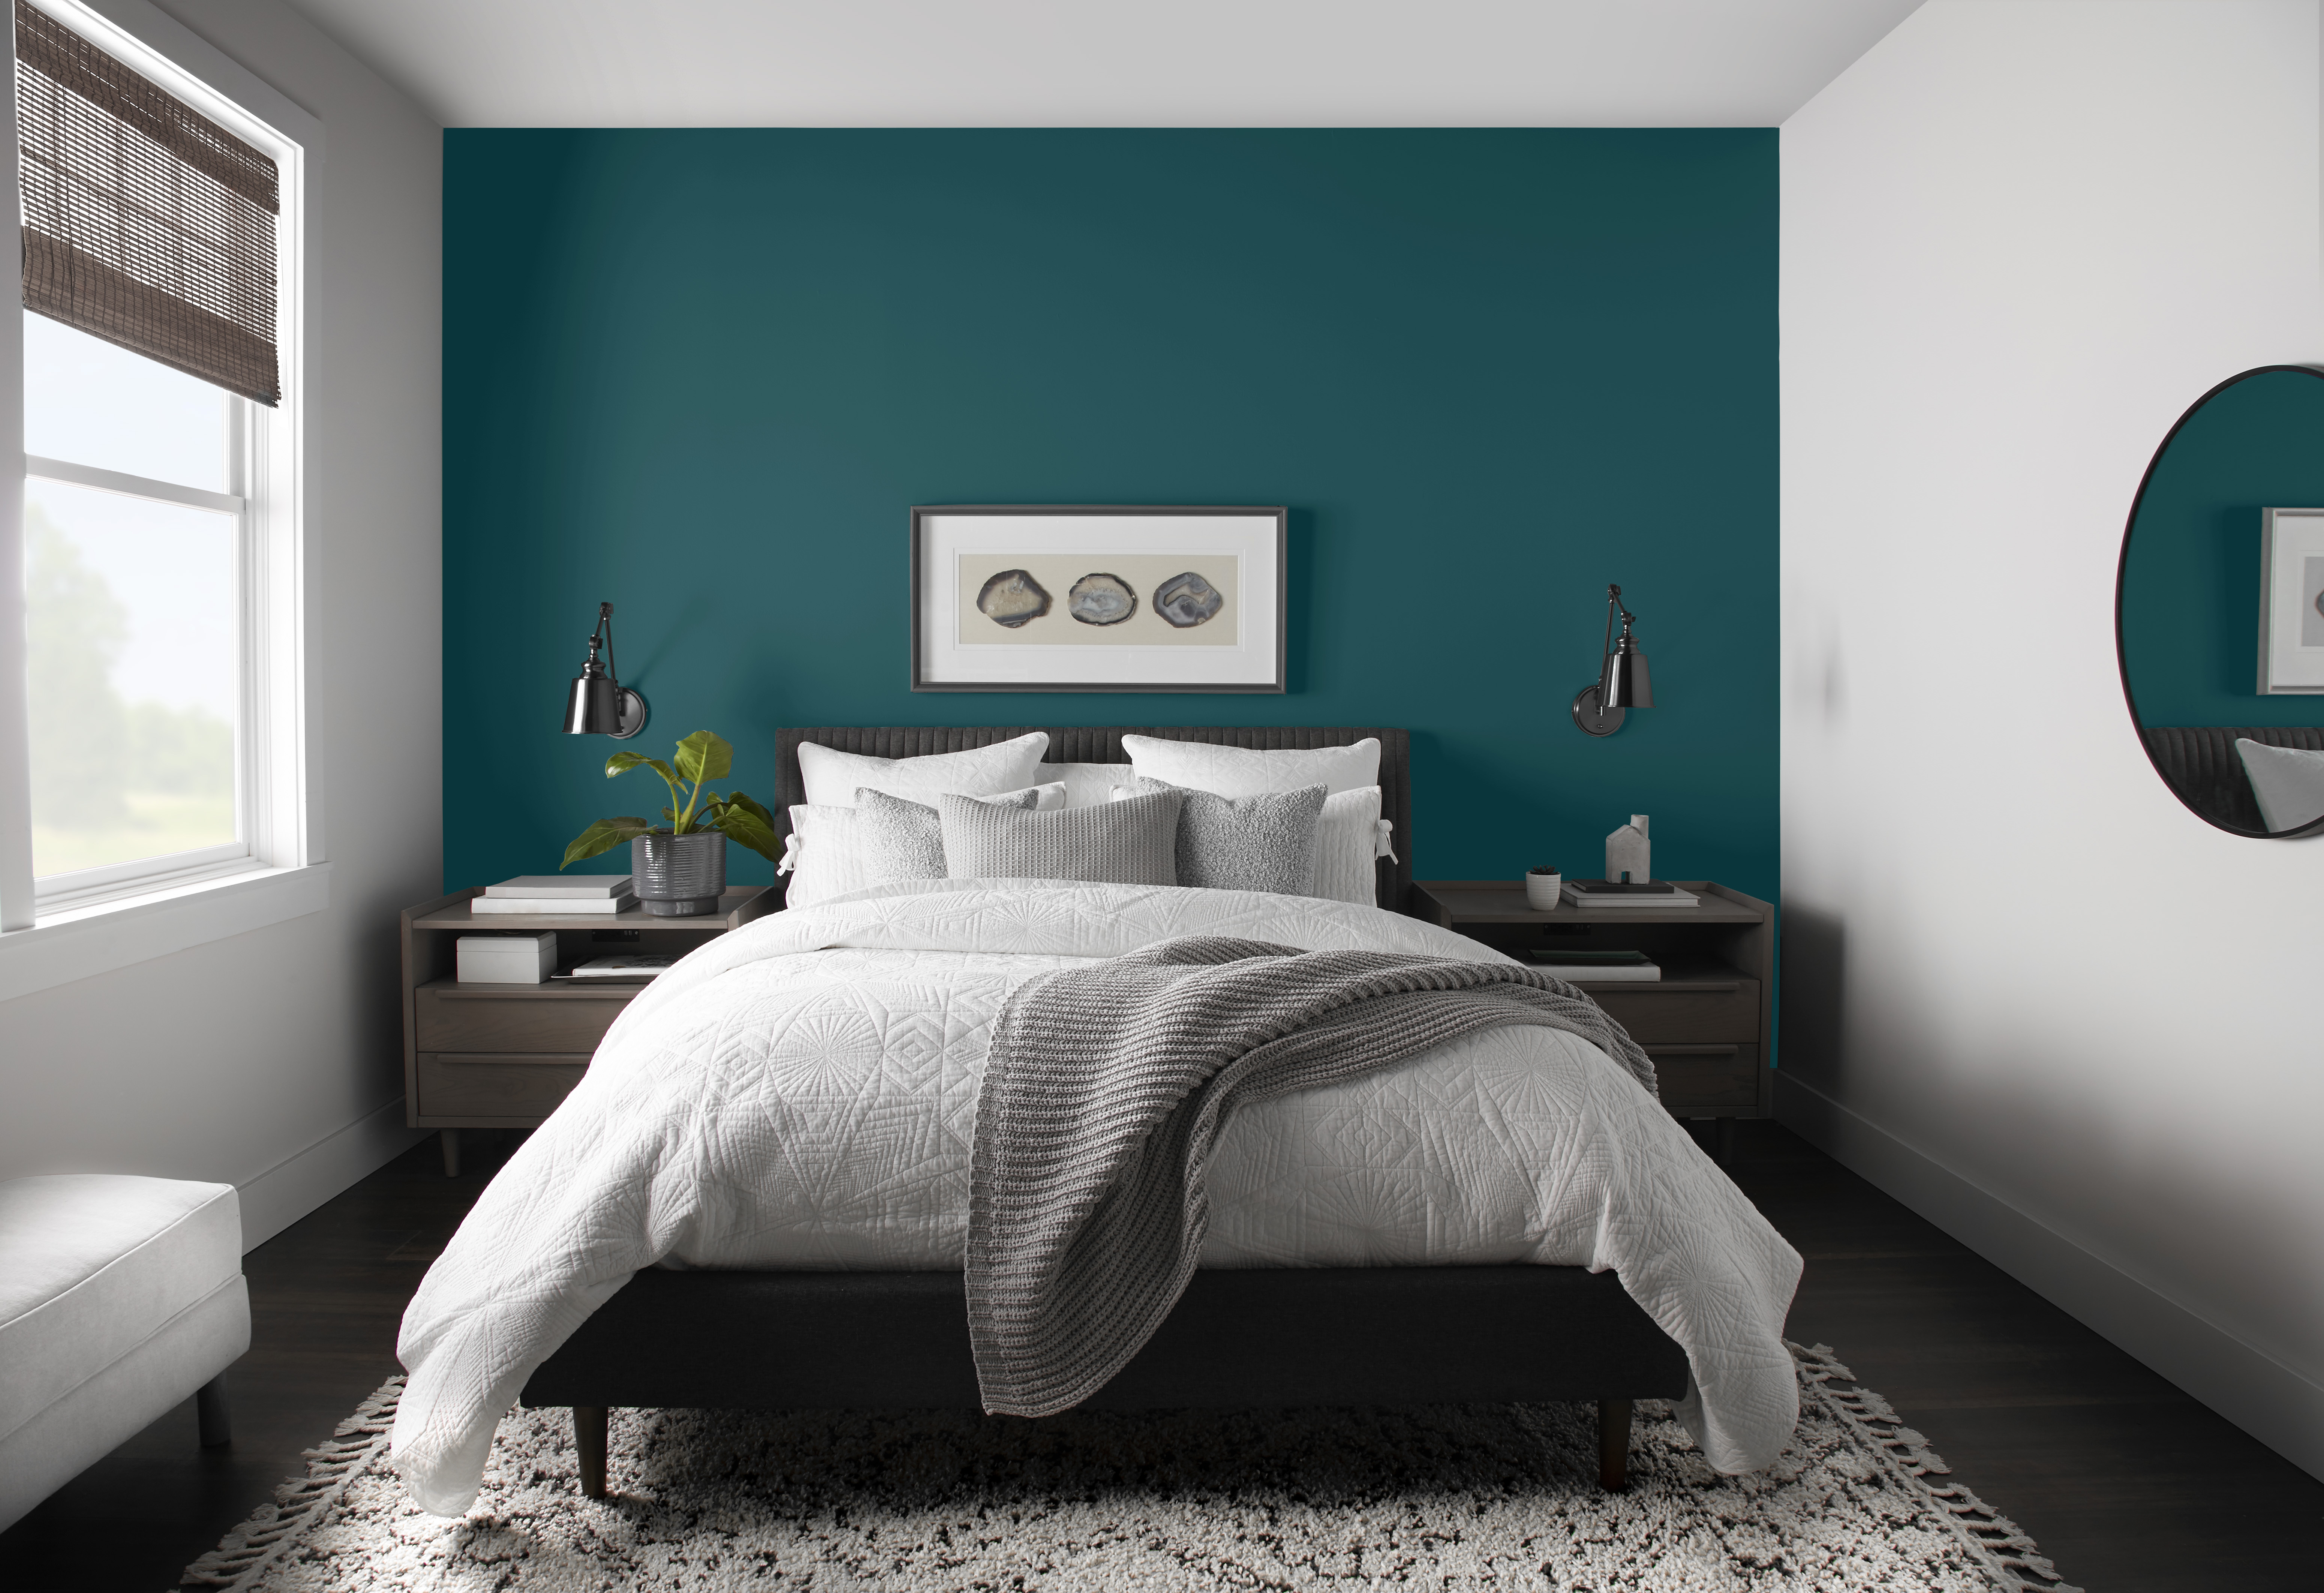 A white bedroom with the bed headboard accent wall painted in a deep teal colour 